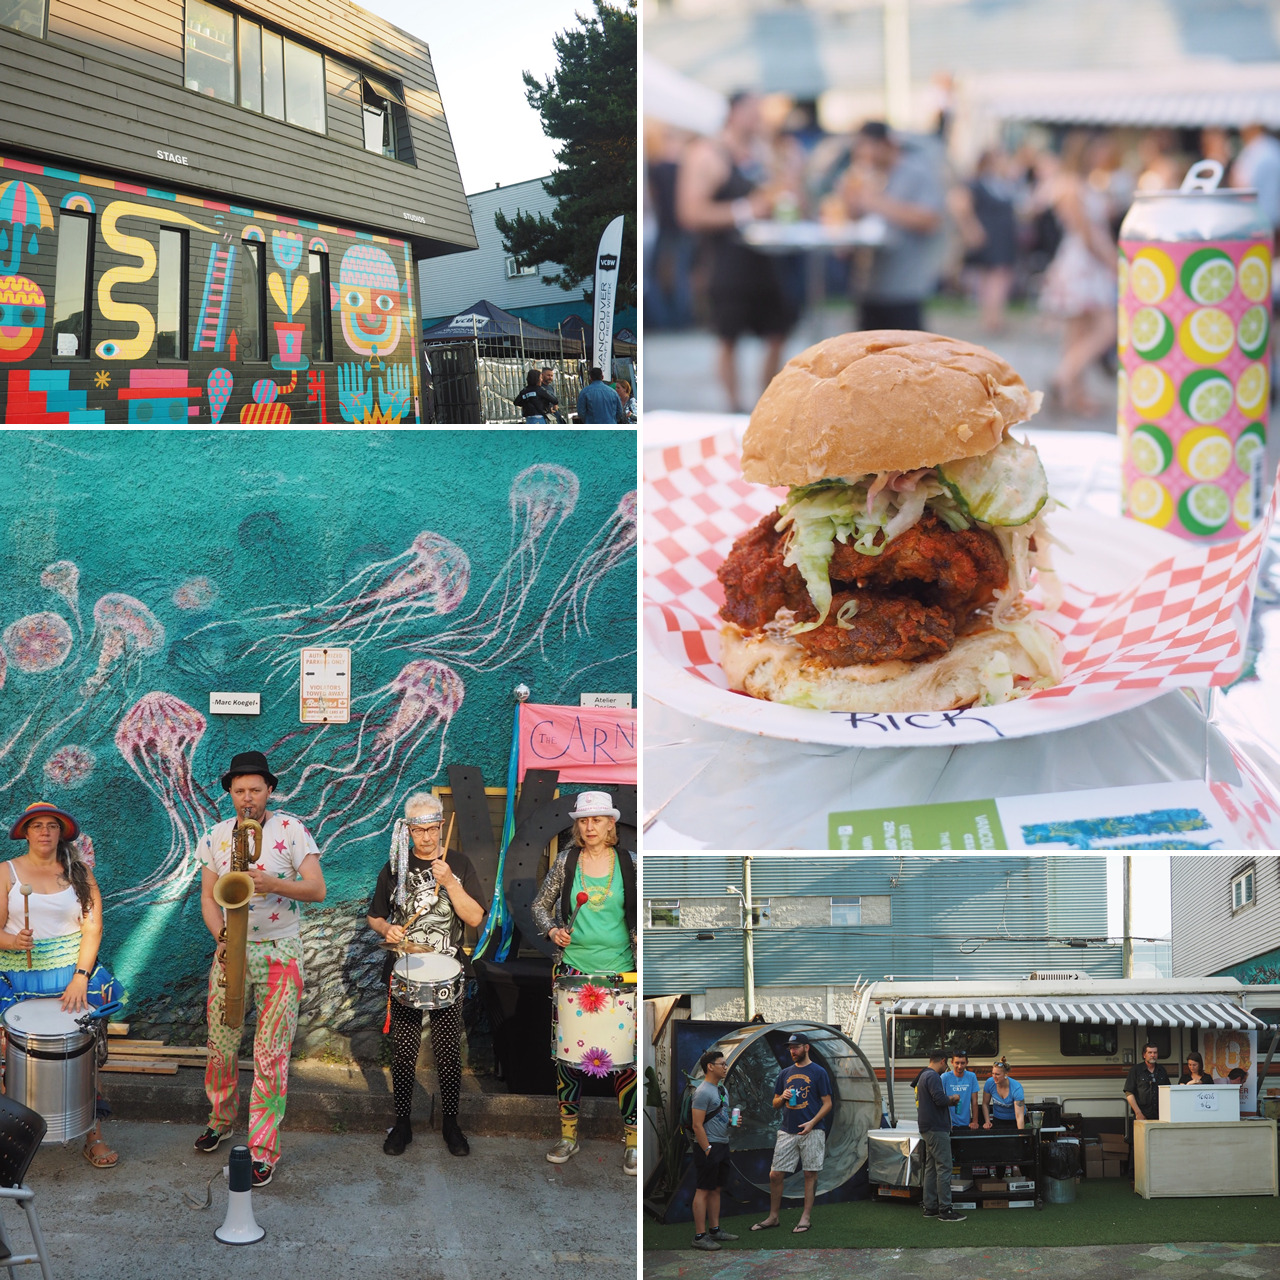 2019 Vancouver Craft Beer Week x Beaumont Studios x Mount Pleasant.
• The Carnival Band performing live for VCBW’s 10th anniversary kickoff opening party.
• Nashville style hot fried chicken thigh sandwich from DownLow Chicken Shack.
• “Lemonade...